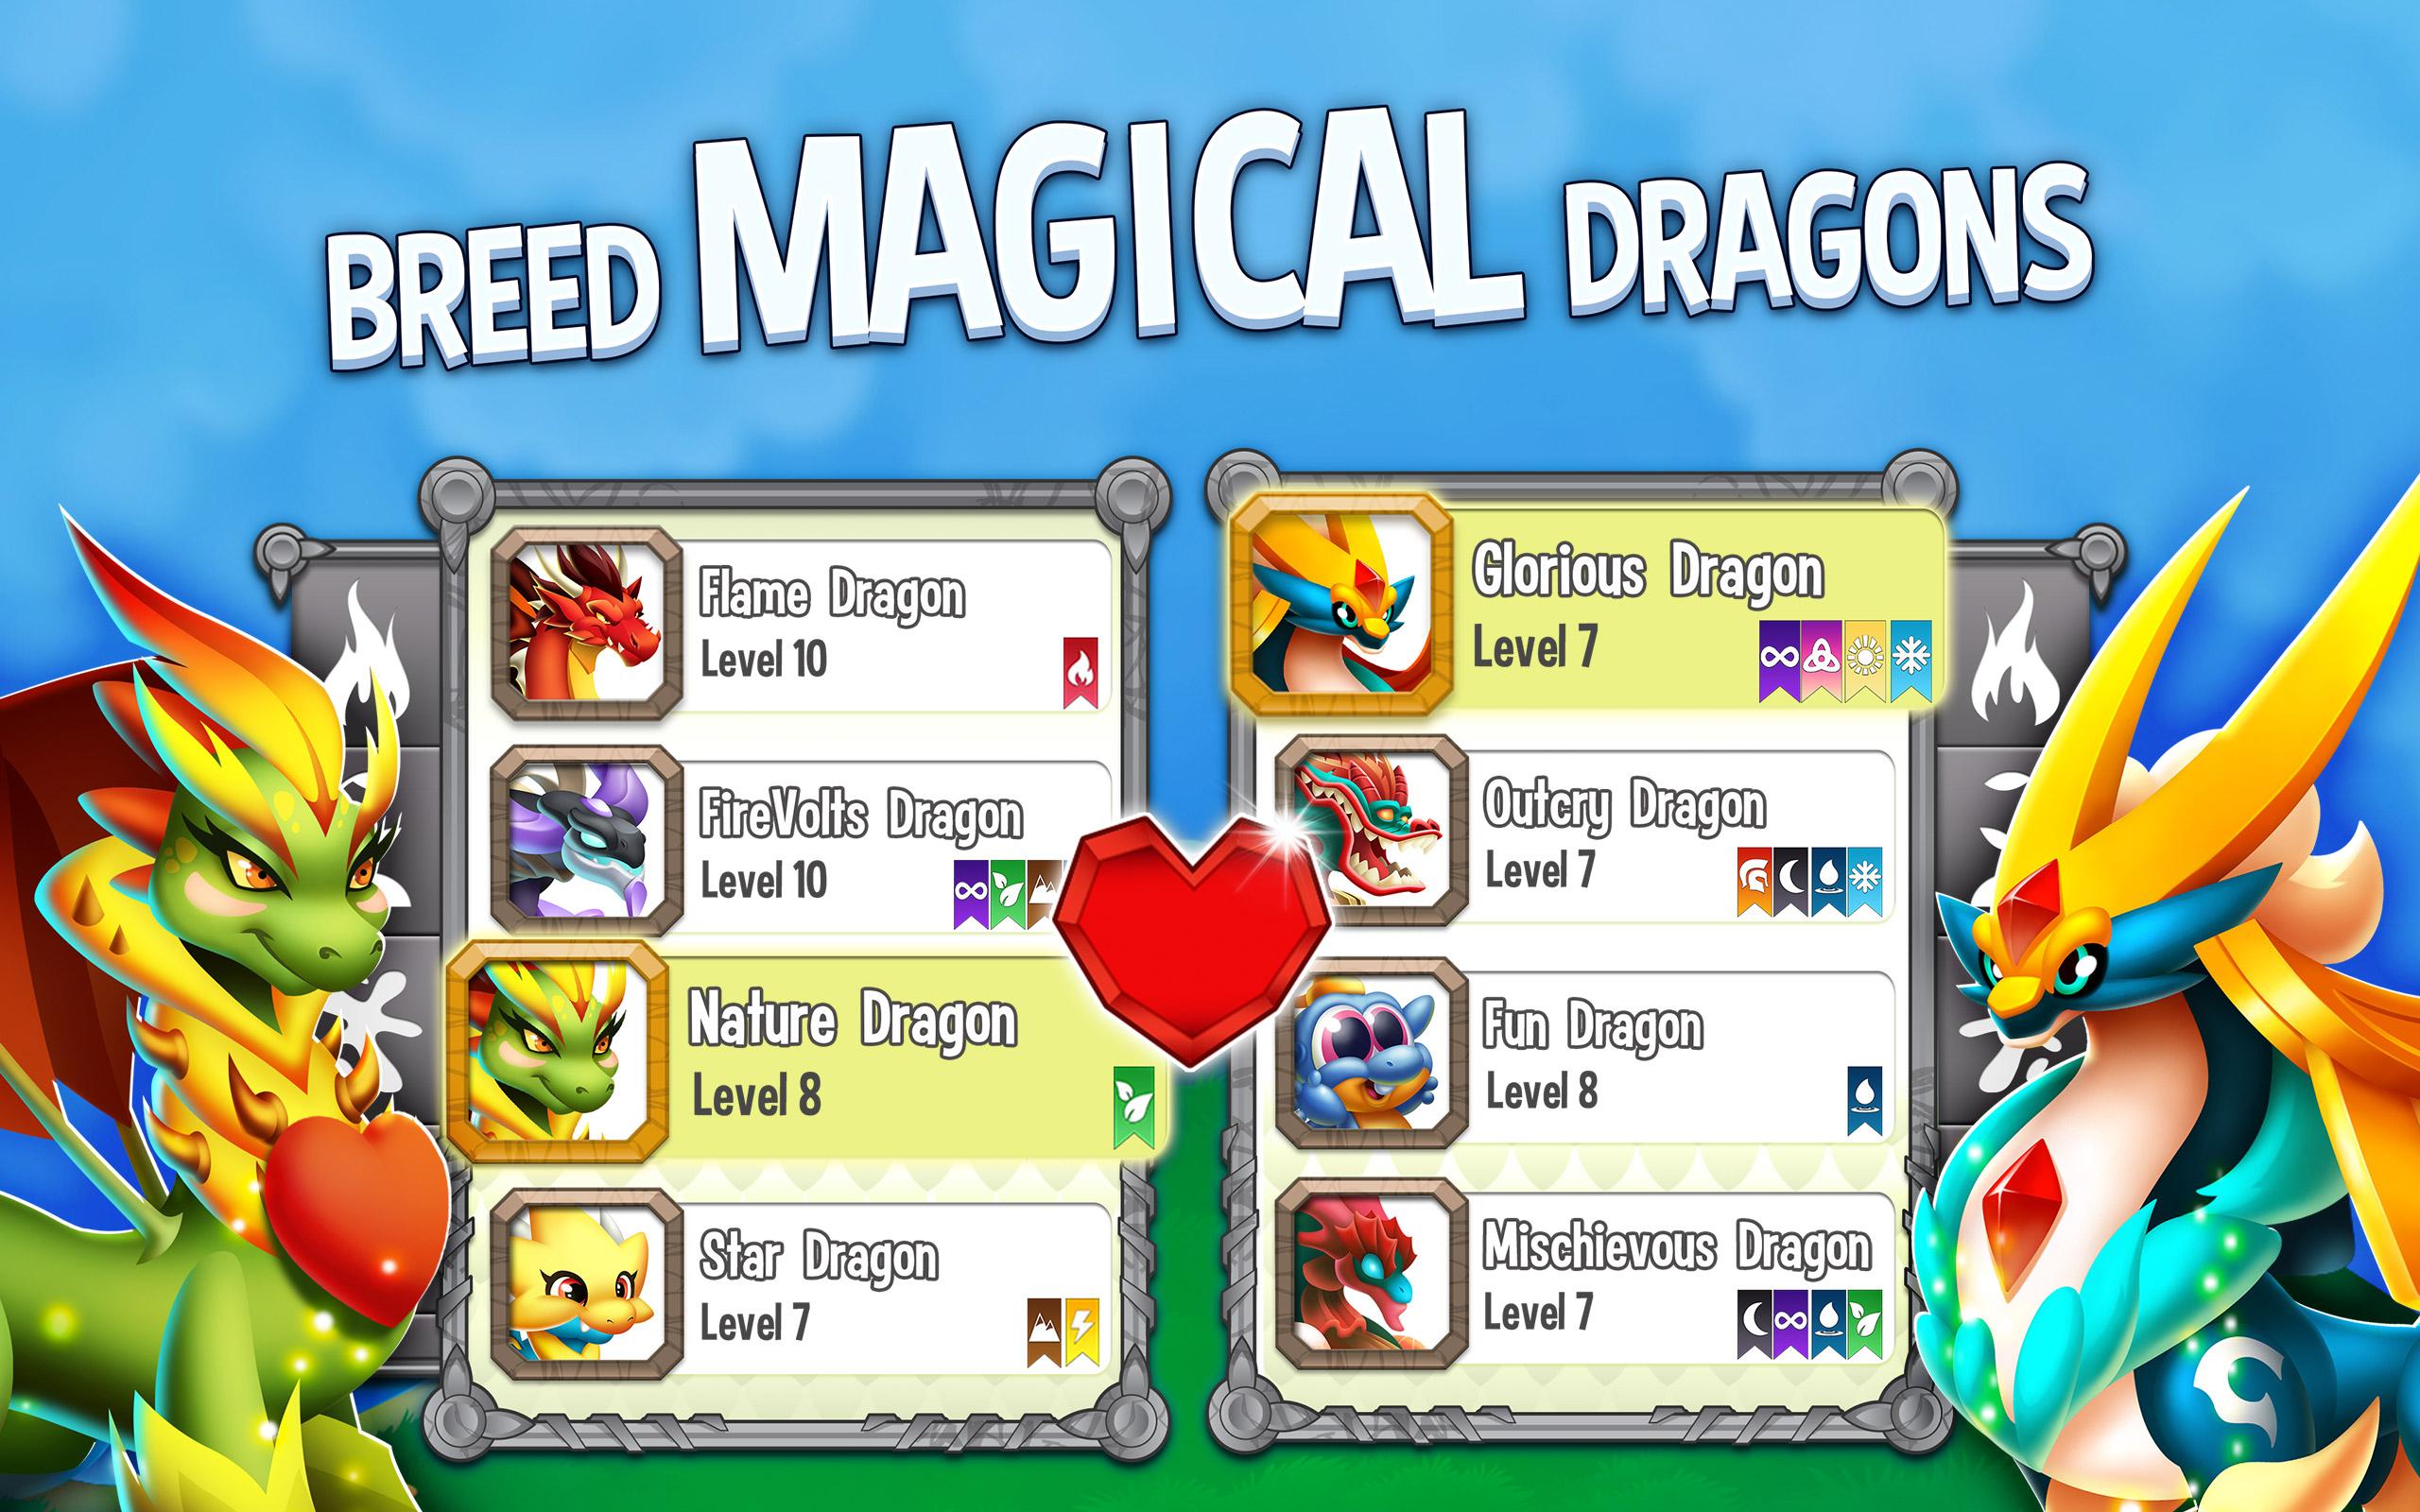 Dragon City for Android - APK Download - 